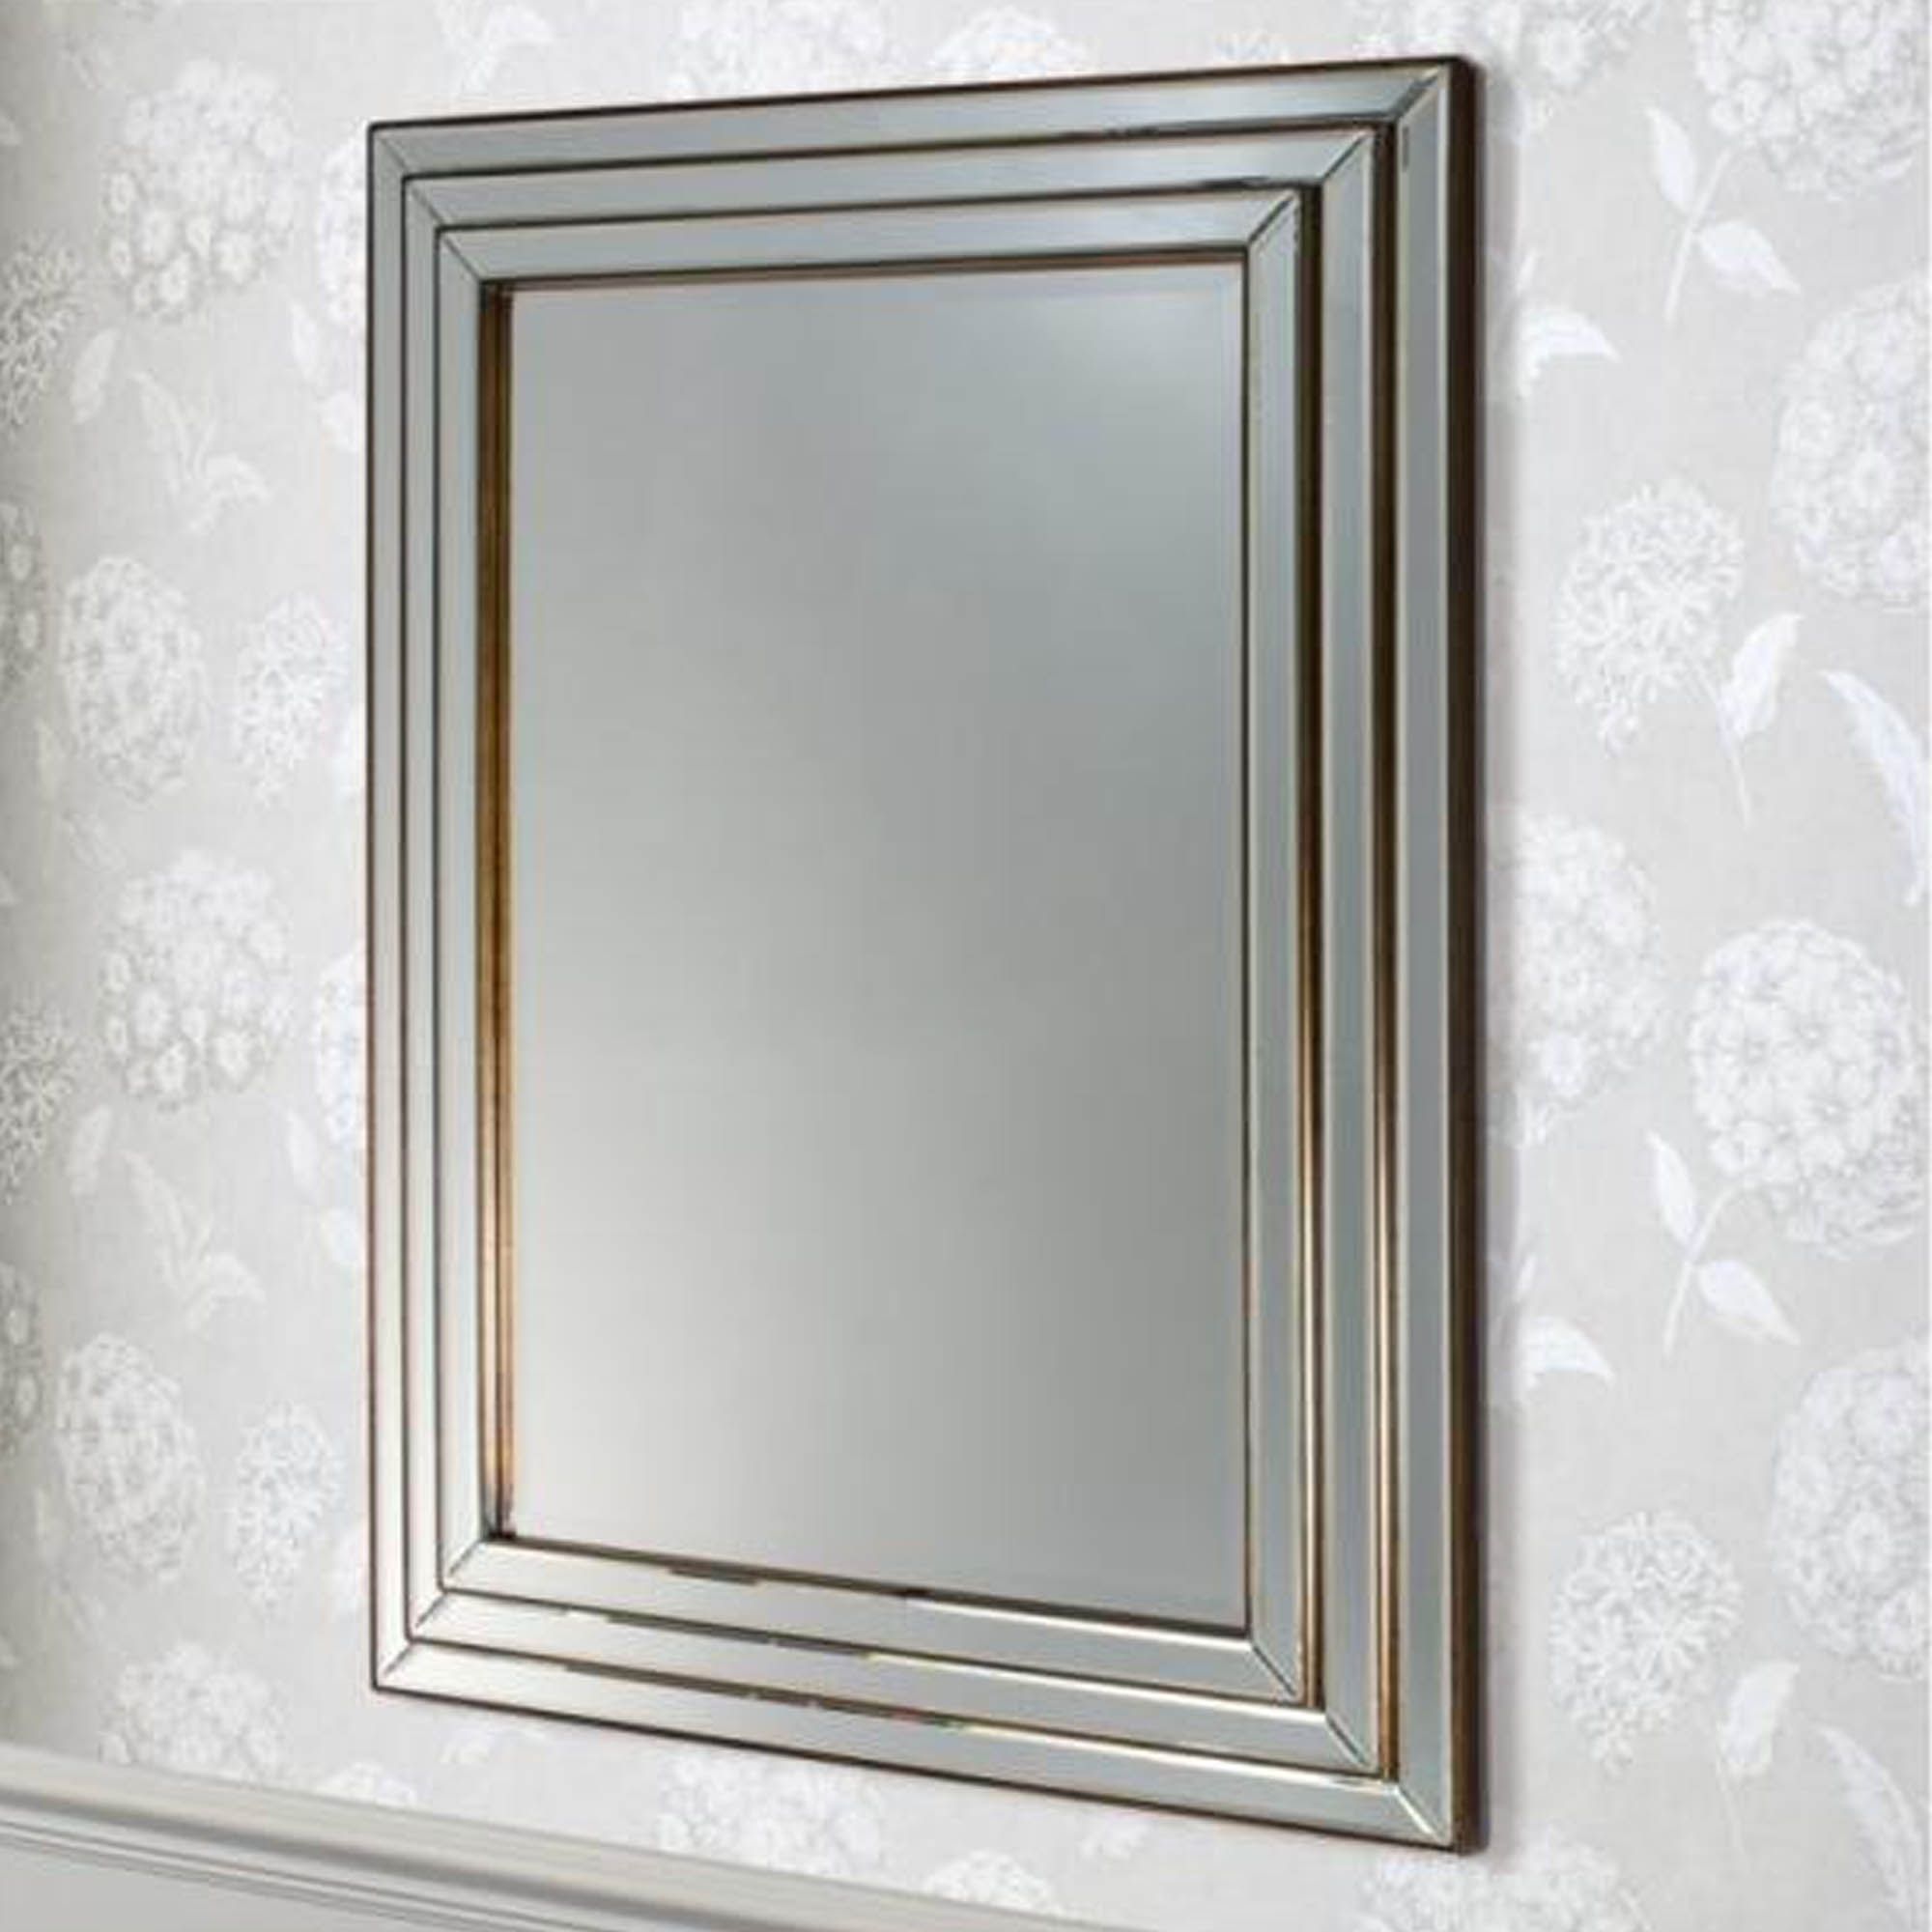 Chamberry Bronze Wall Mirror | Wall Mirror | Homesdirect365 For Bronze Quatrefoil Wall Mirrors (View 10 of 15)